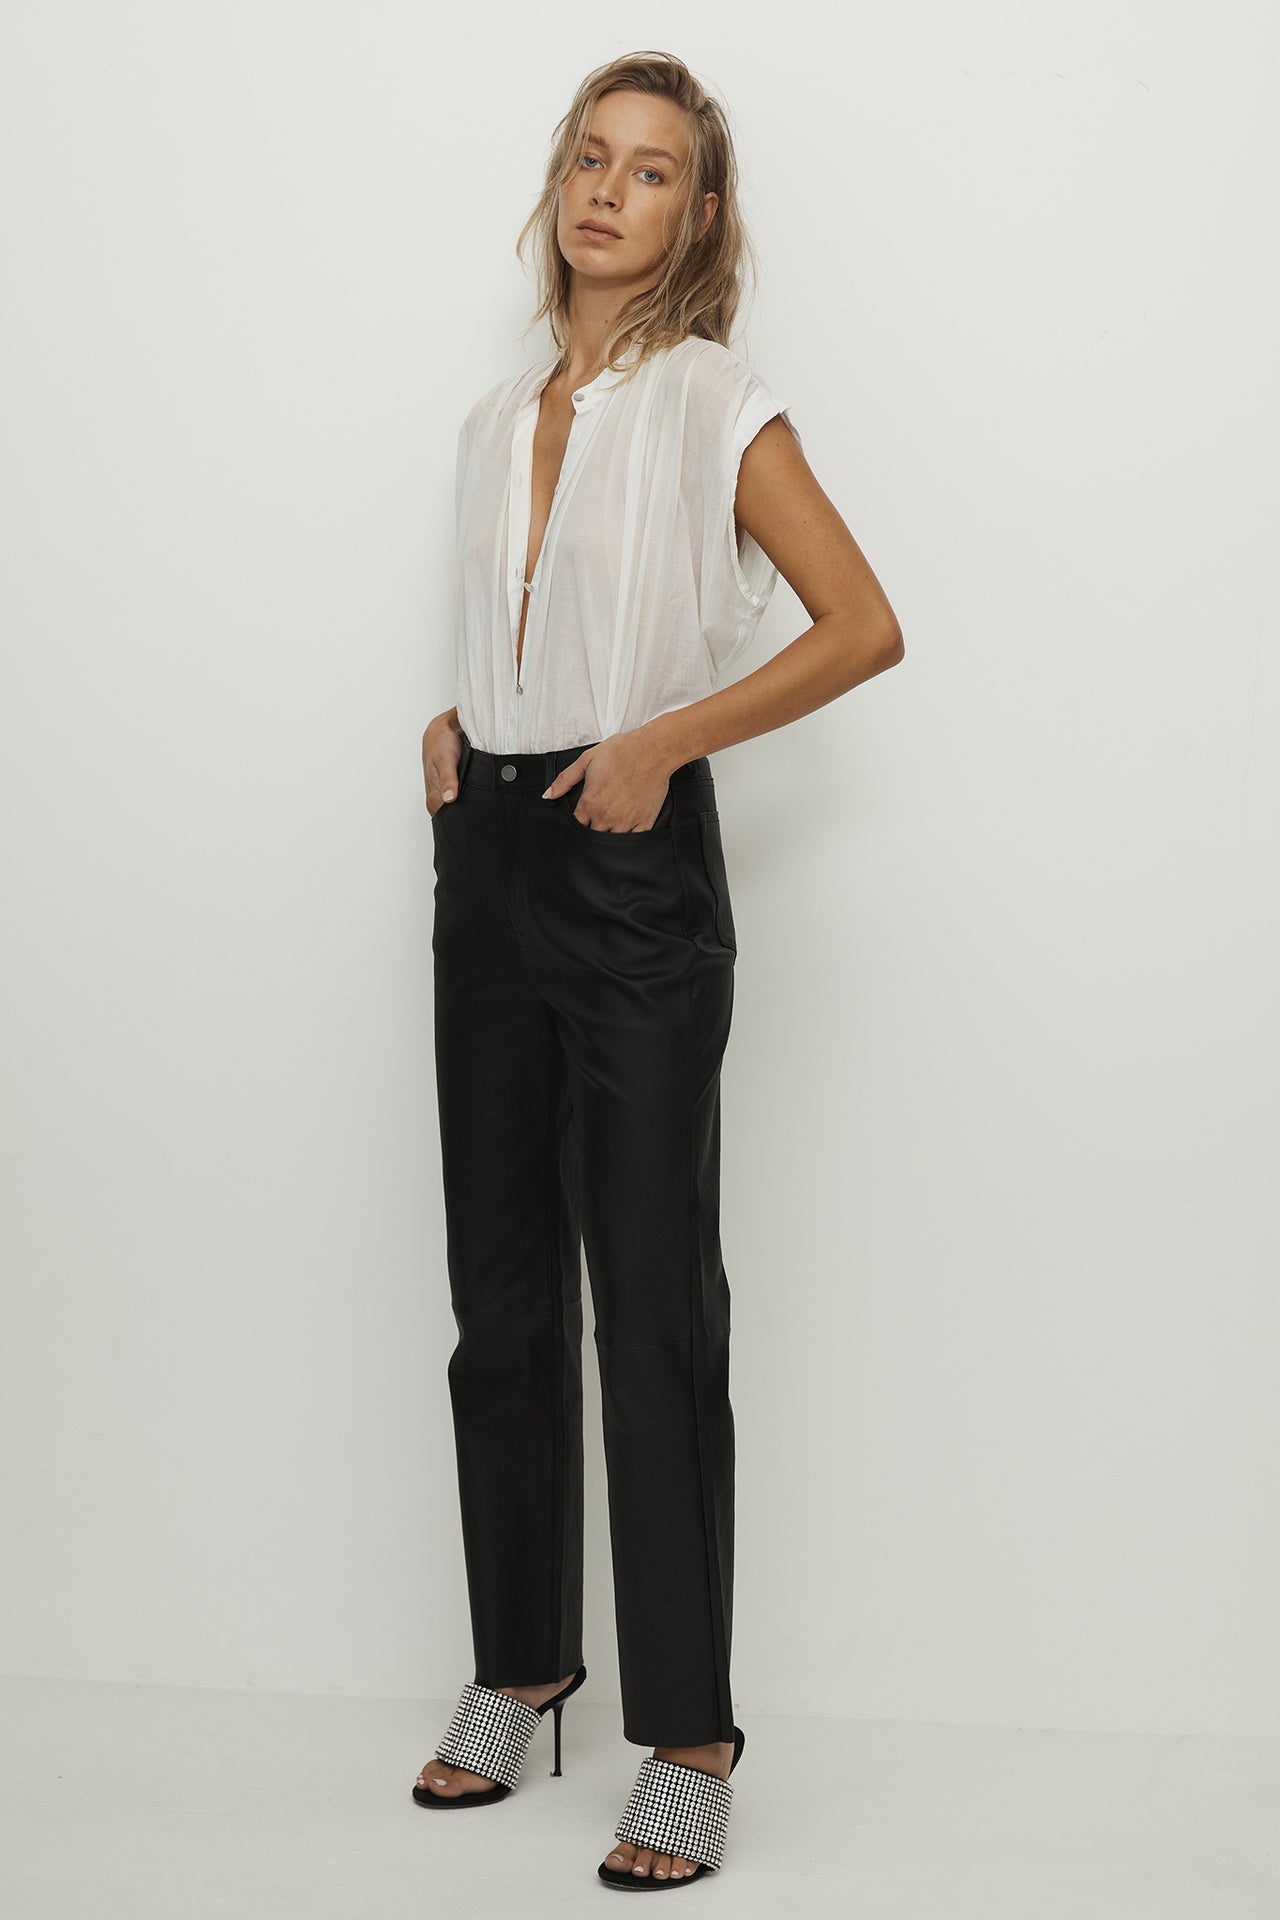 The West Broadway Seek Black Leggings Ladies Leather Pants Made By  West14th. Made From 100% Genuine Soft Lamb Leather. For all seasons,  Quality To Last A Lifetime. Wardrobe Staples